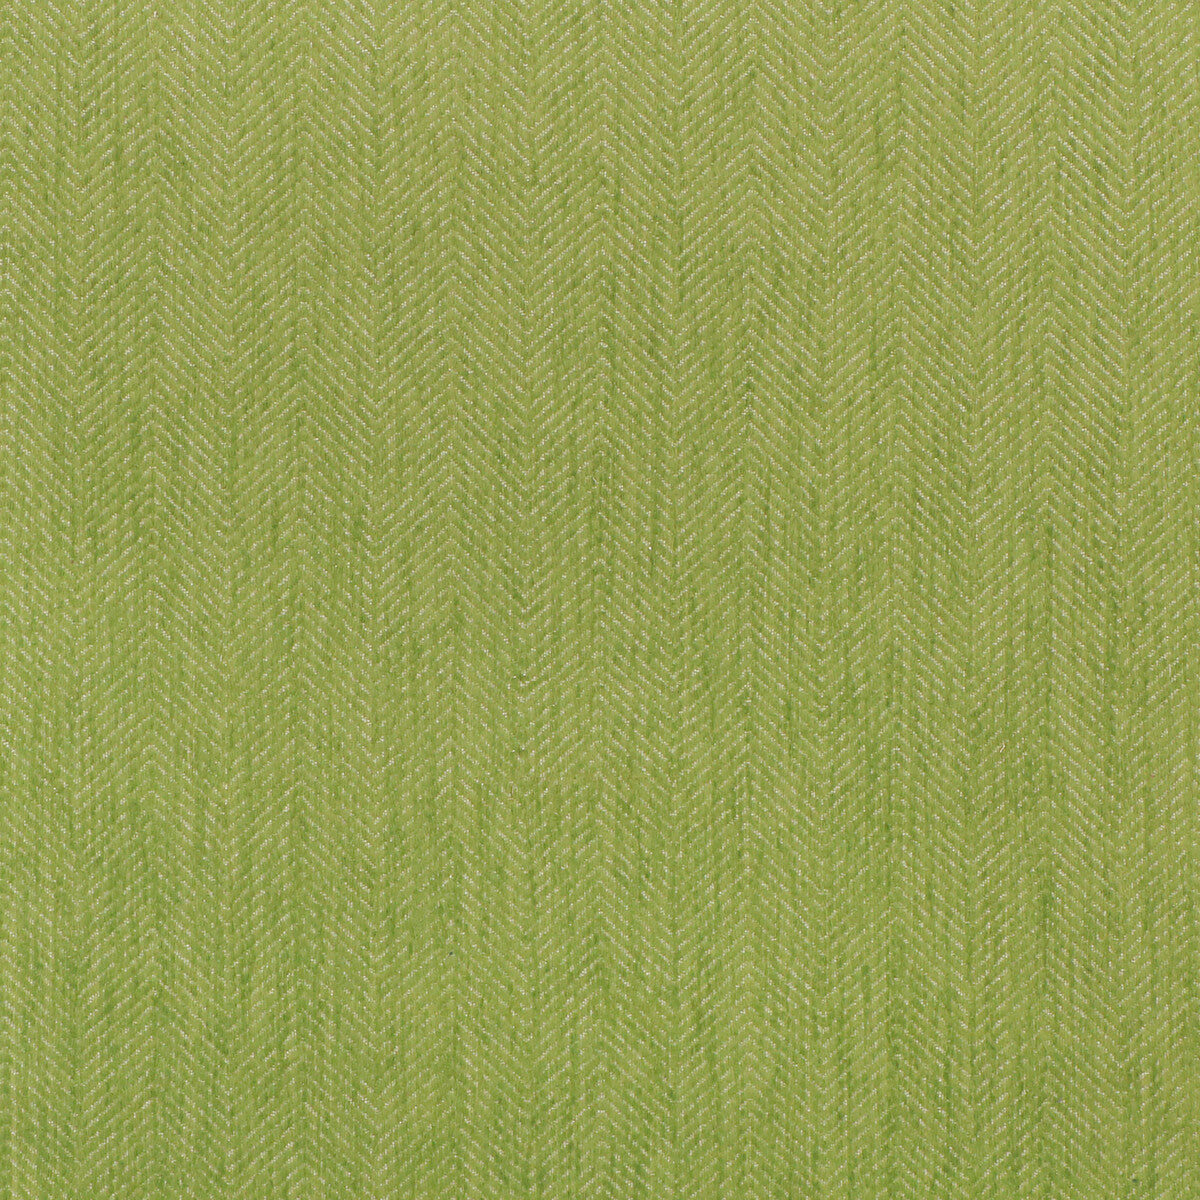 Kravet Smart fabric in 35361-3 color - pattern 35361.3.0 - by Kravet Smart in the Inside Out Performance Fabrics collection